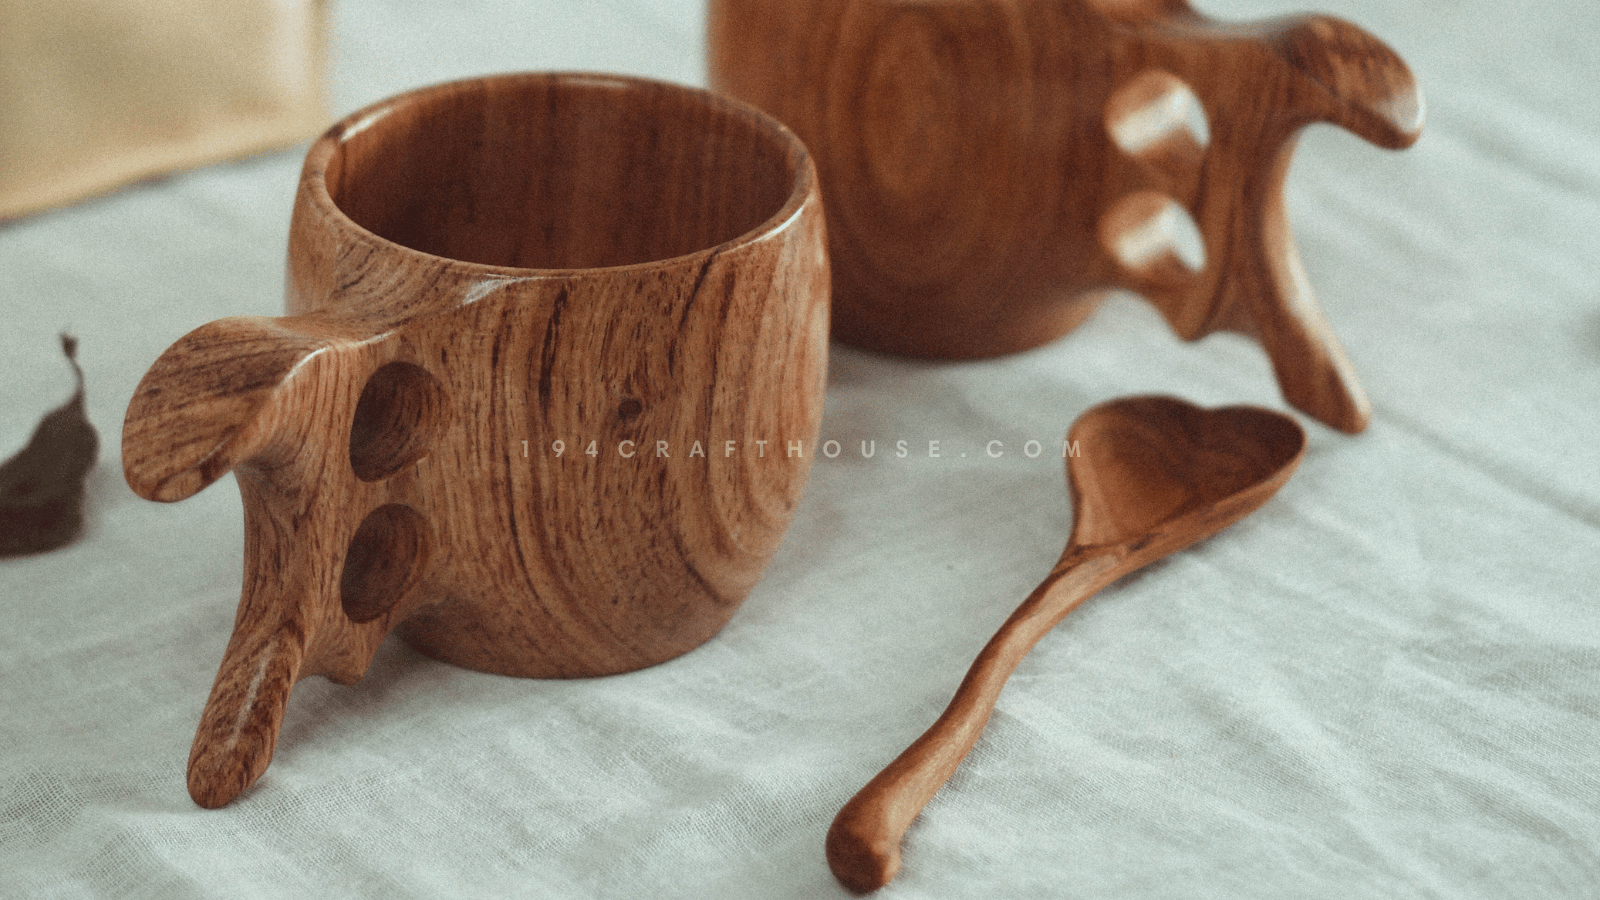 Why you should buy 194 Craft House's Wooden Kuksa cup?